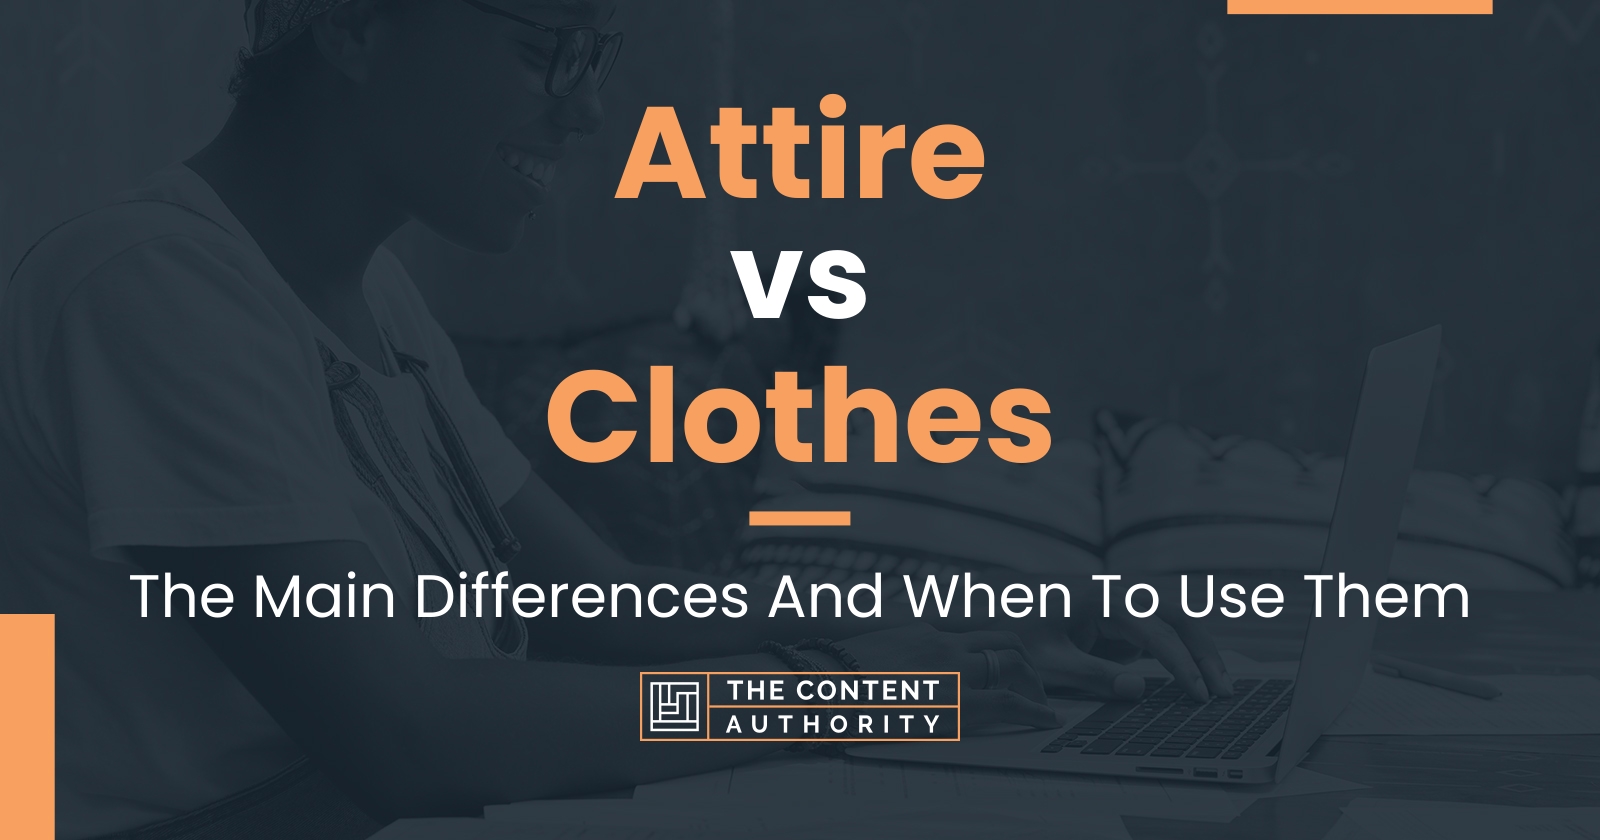 Attire vs Clothes: The Main Differences And When To Use Them